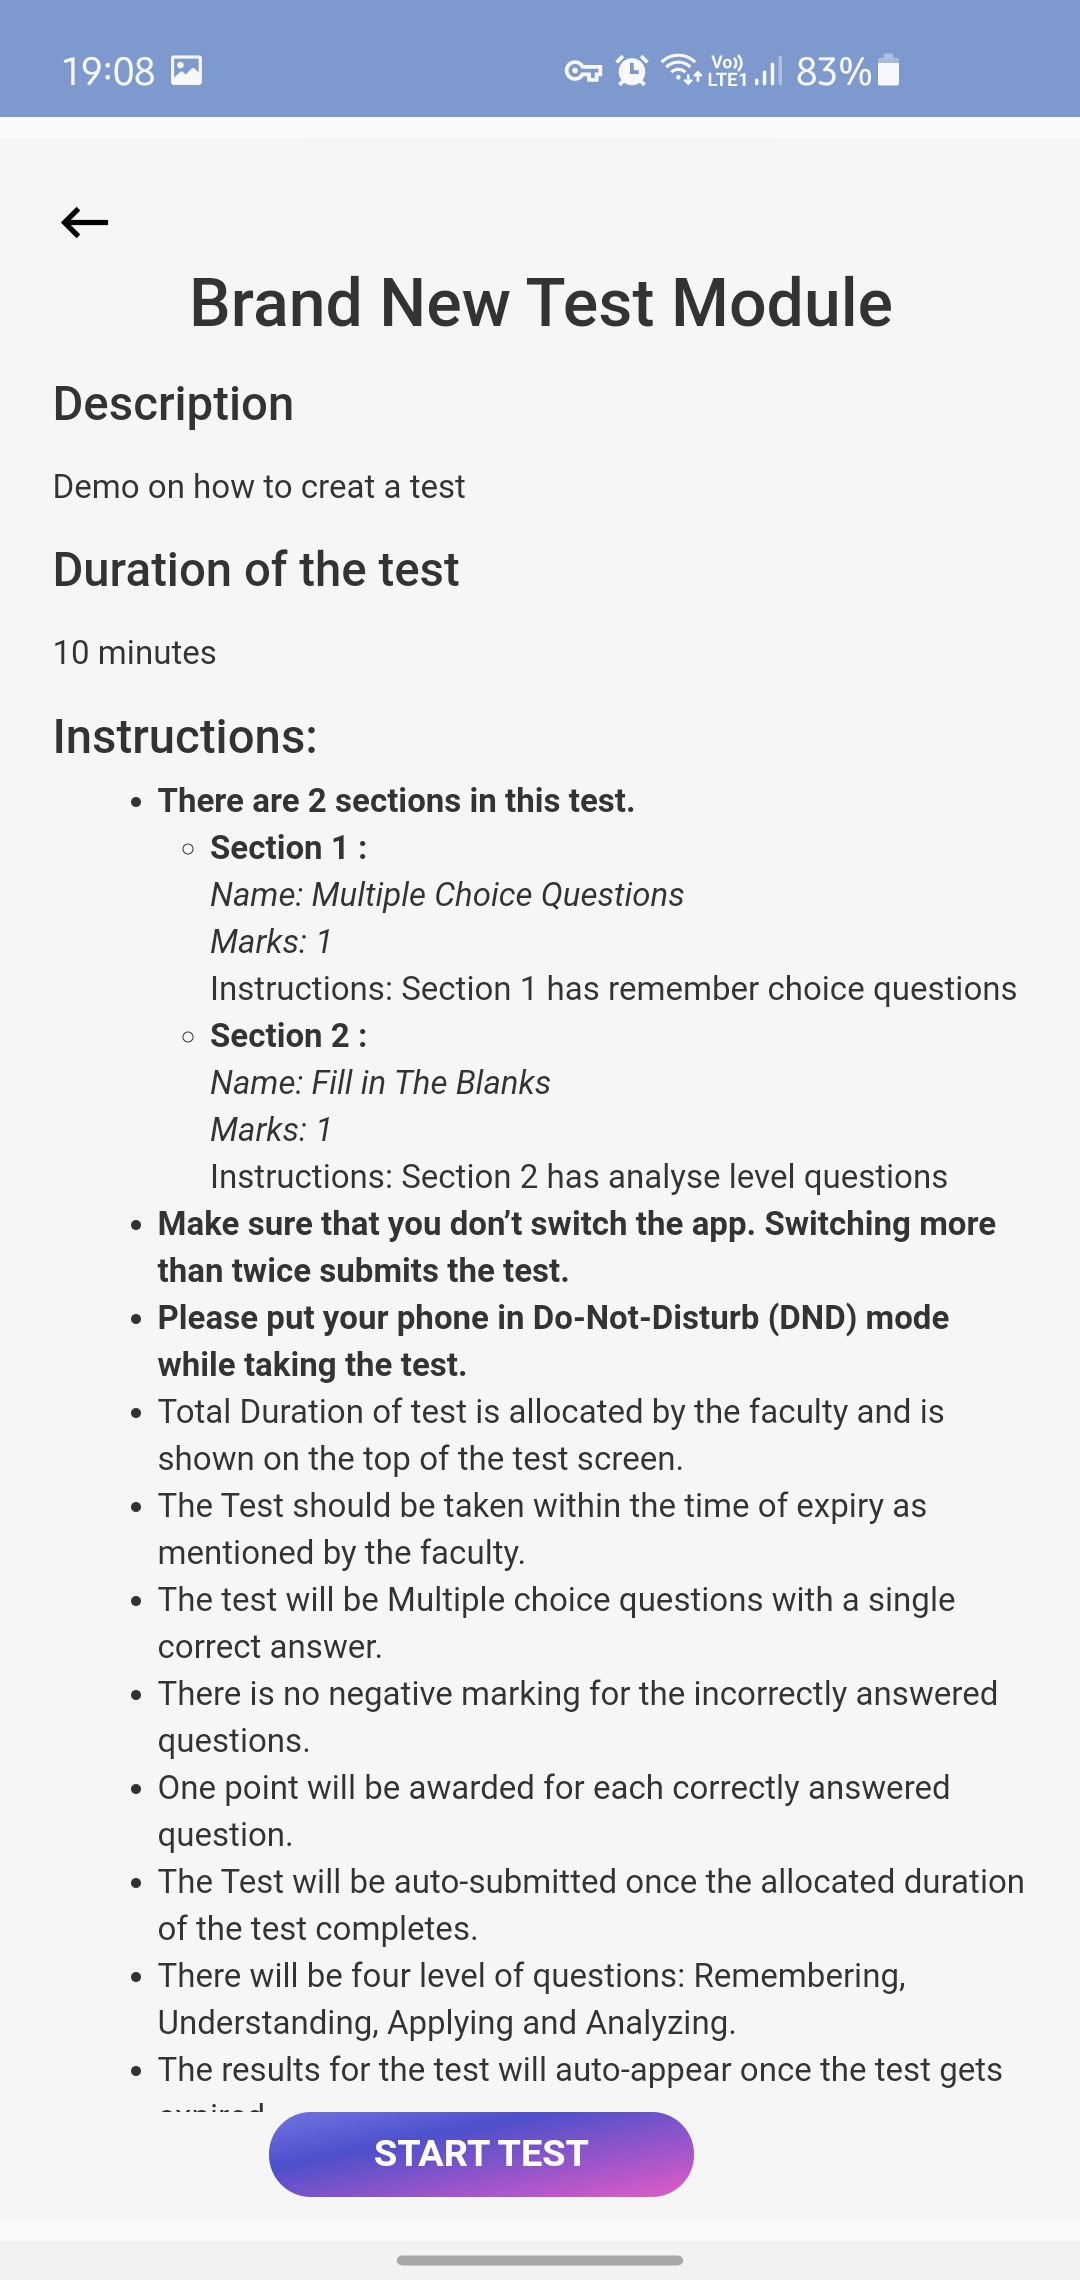 27. Students can see the Section wise details in “Test Instructions